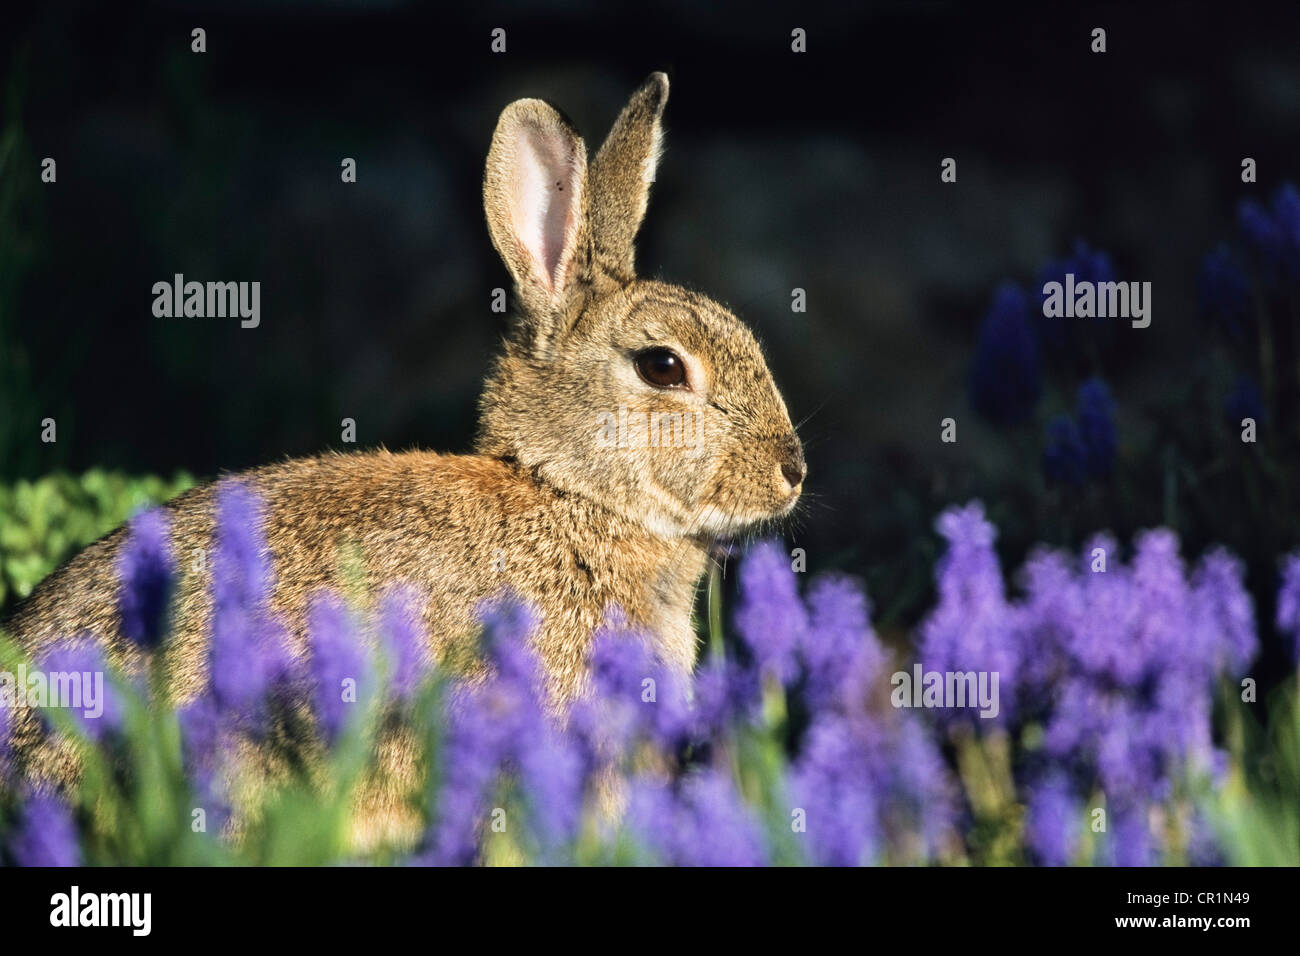 European Rabbit or Common Rabbit (Oryctolagus cuniculus) sitting in flower bed, Bavaria, Germany, Europe Stock Photo